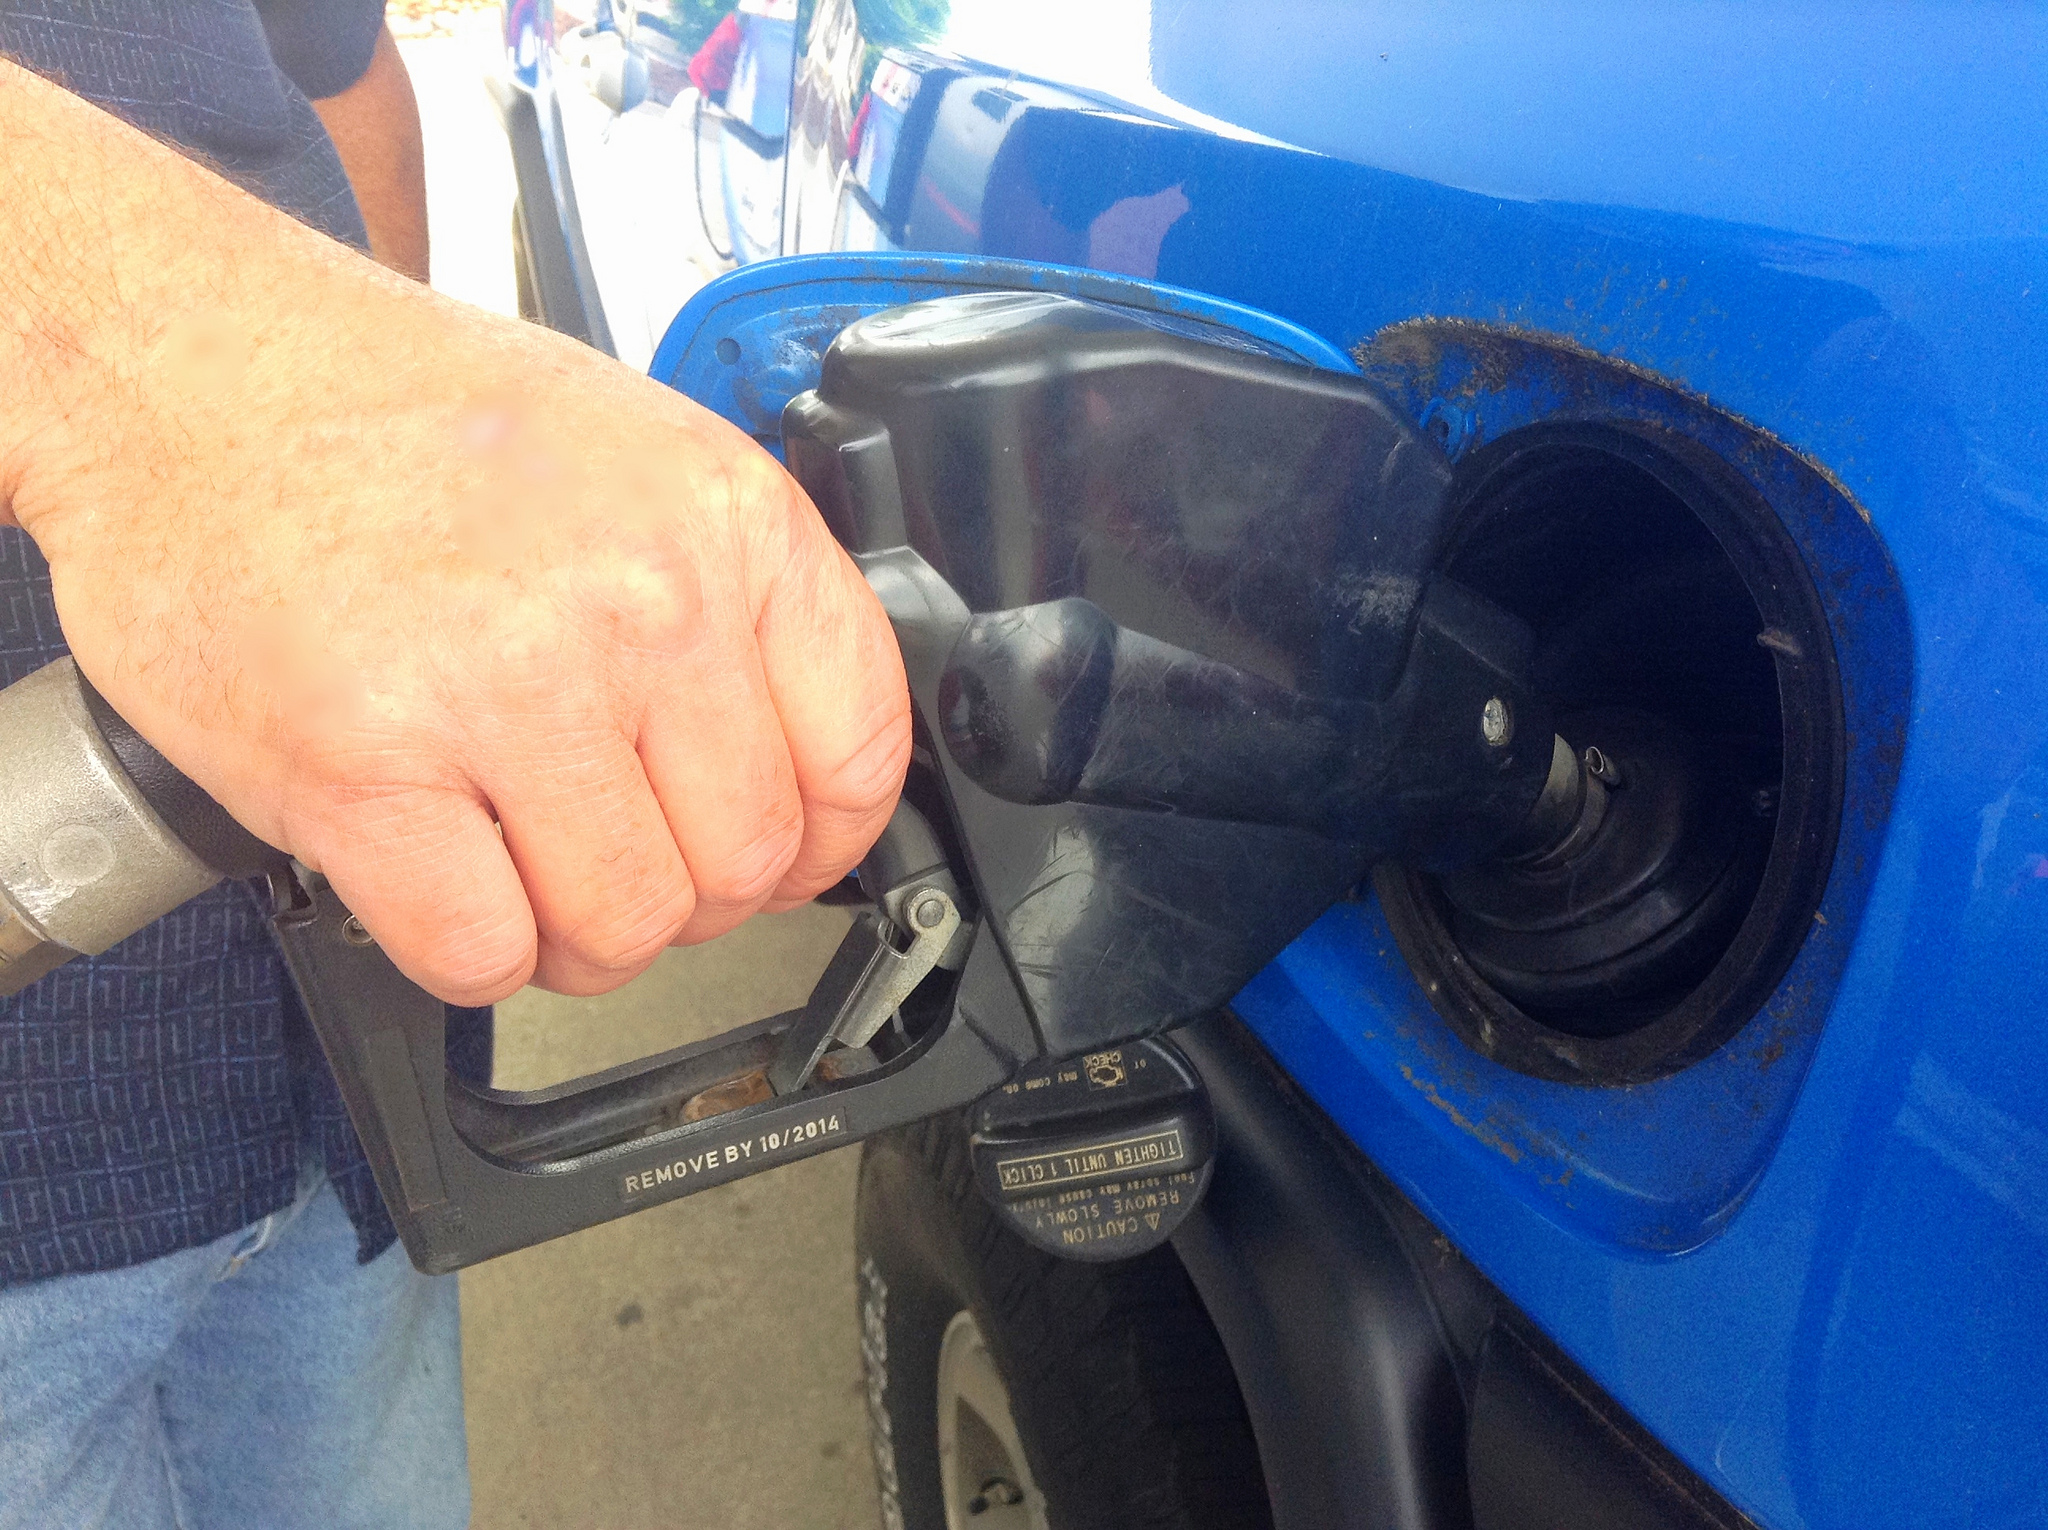 Is There Any Way to Overcome the High Price of Gas?